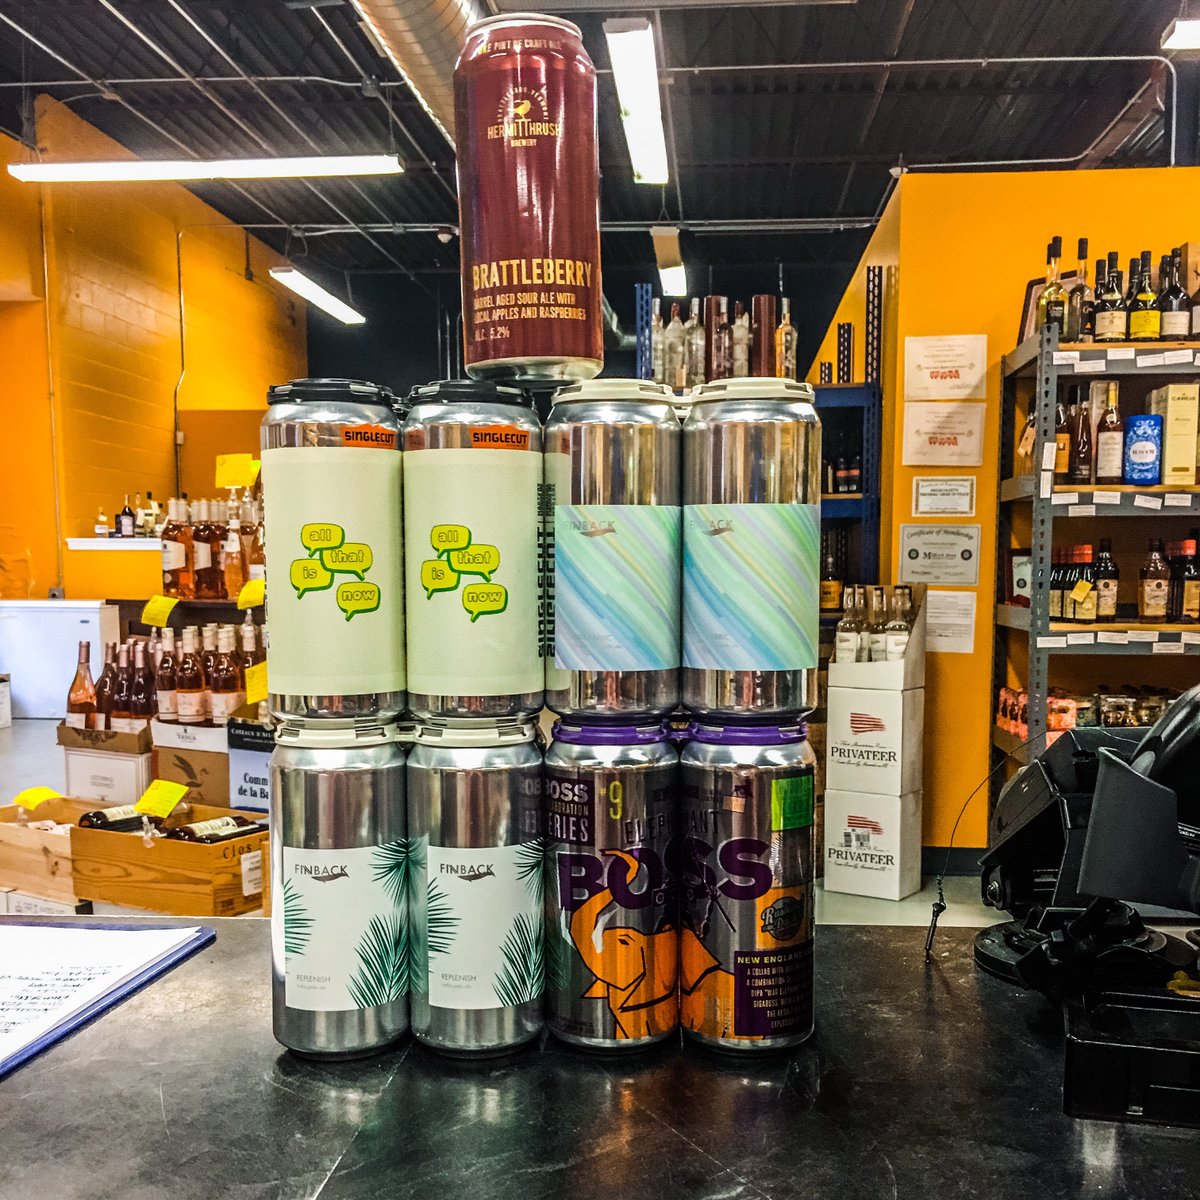 One last delivery of delicious beer! From @crftcollective, @HermitThrush Brattleberry, @SingleCutBeer All that is Now, @NewburghBrewing Elephant Boss, and @finbackbrewery Replenish & Social Fabric! #ipaheaven #dipas #ddh #sourplease #barrelaged #northeastbeer #craftbeerlovers